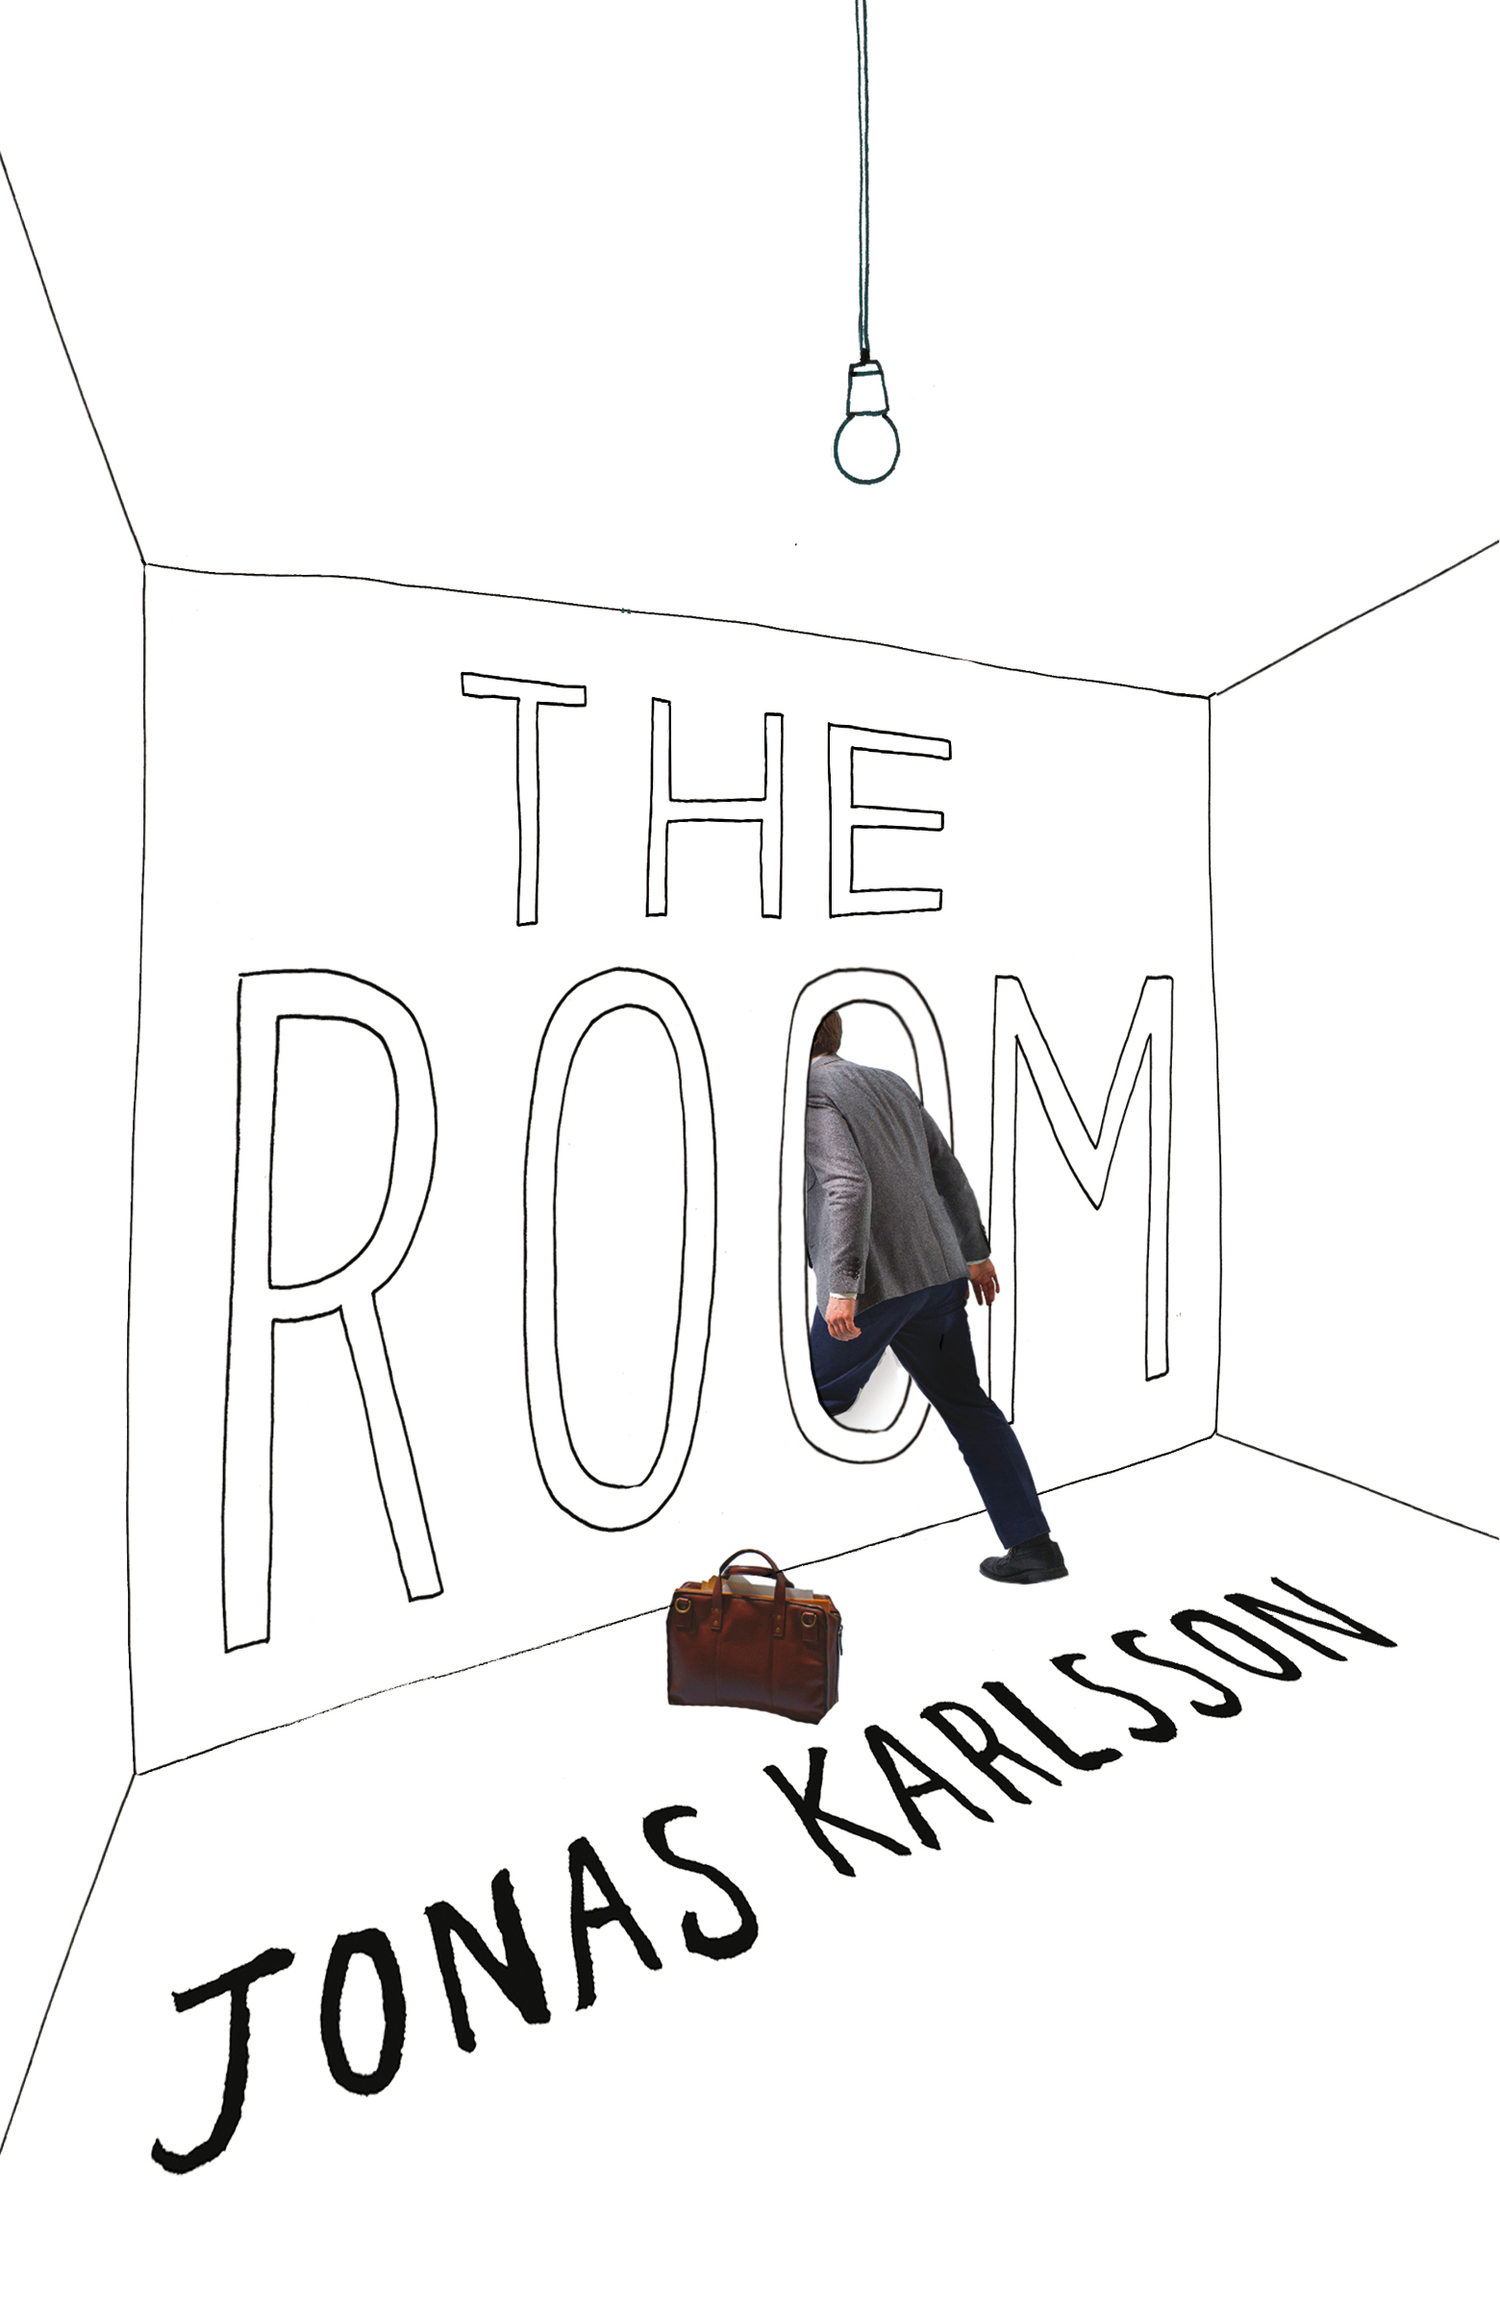 The room poster